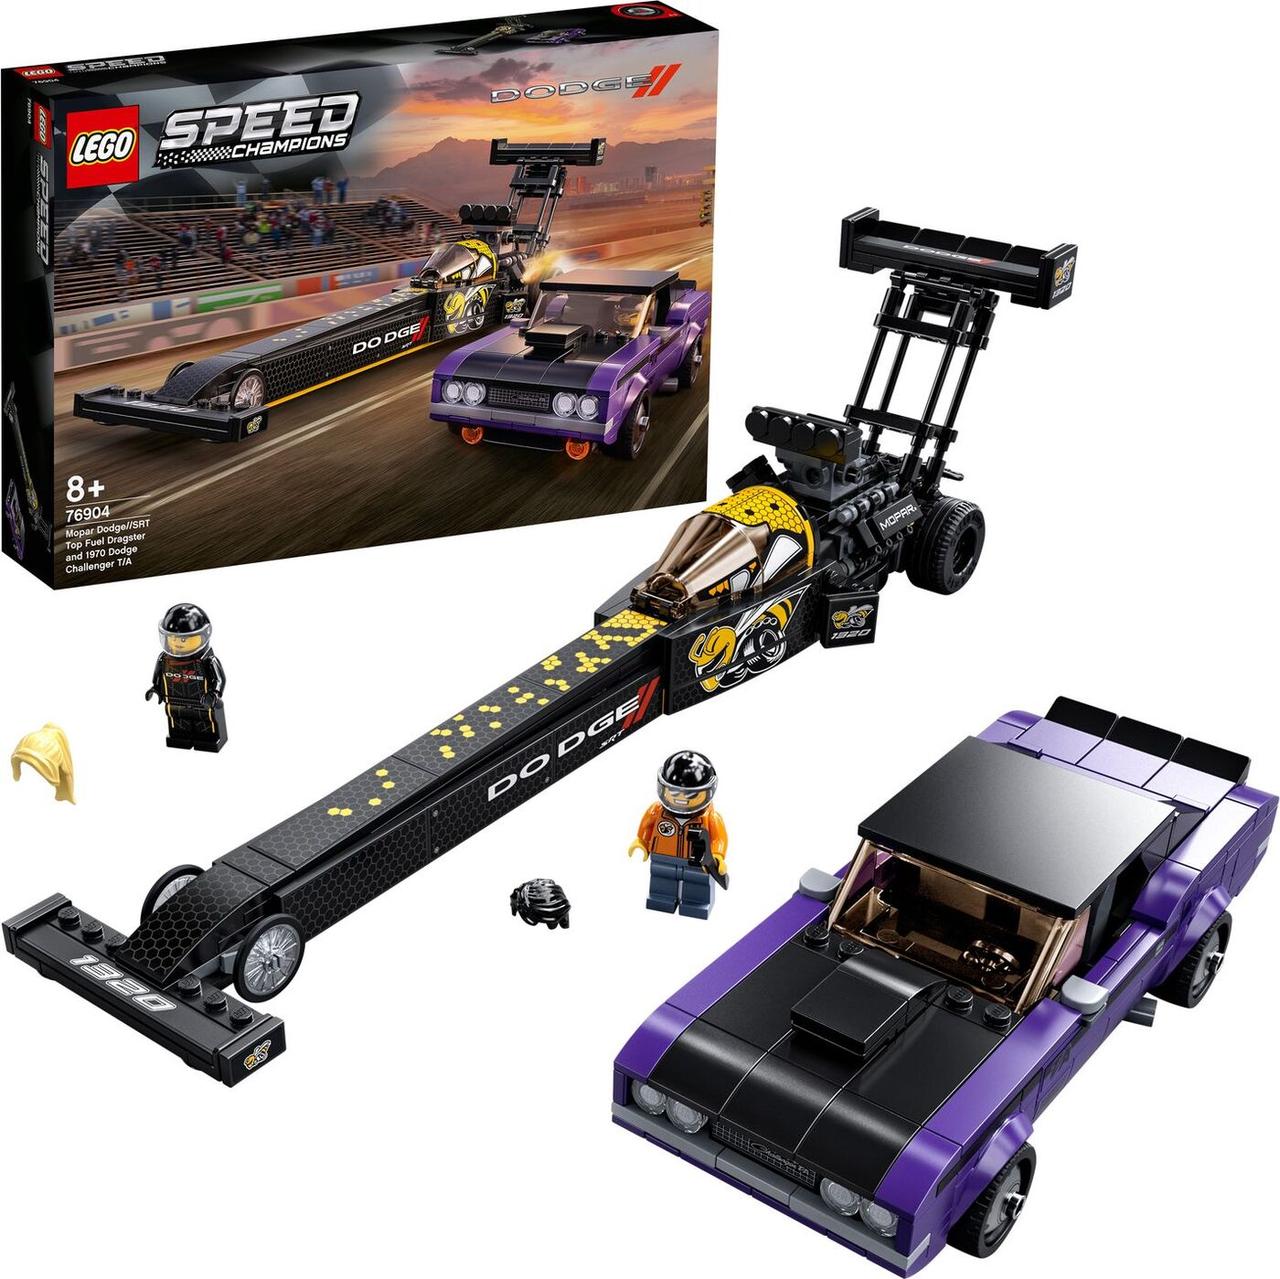 76904 Lego Speed Champions Mopar Dodge//SRT Top Fuel Dragster and Dodge Challenger 1970 года T/A - фото 3 - id-p94019933